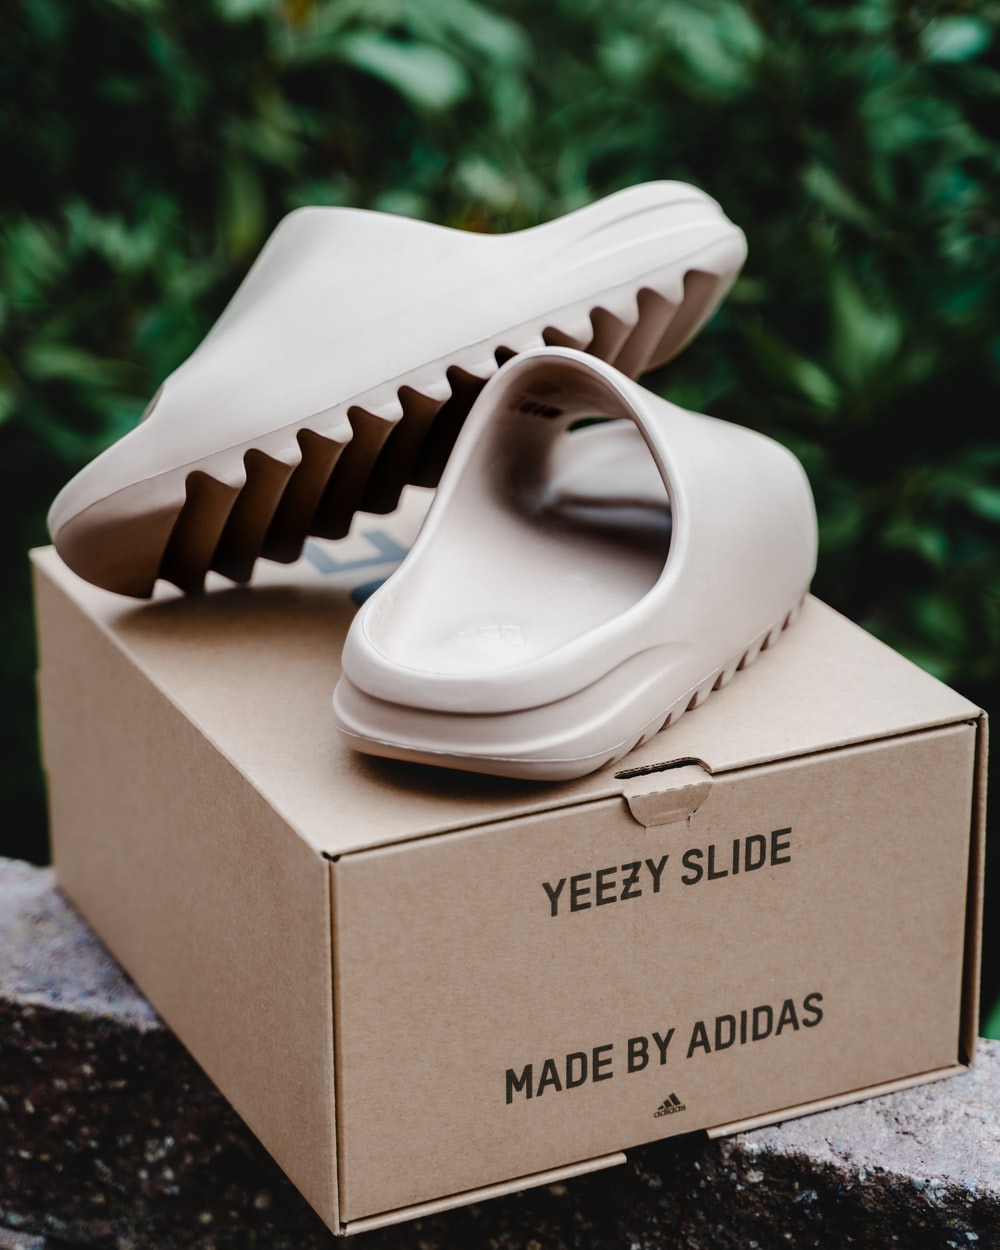 Yeezy Boost 350 Picture. Download Free Image